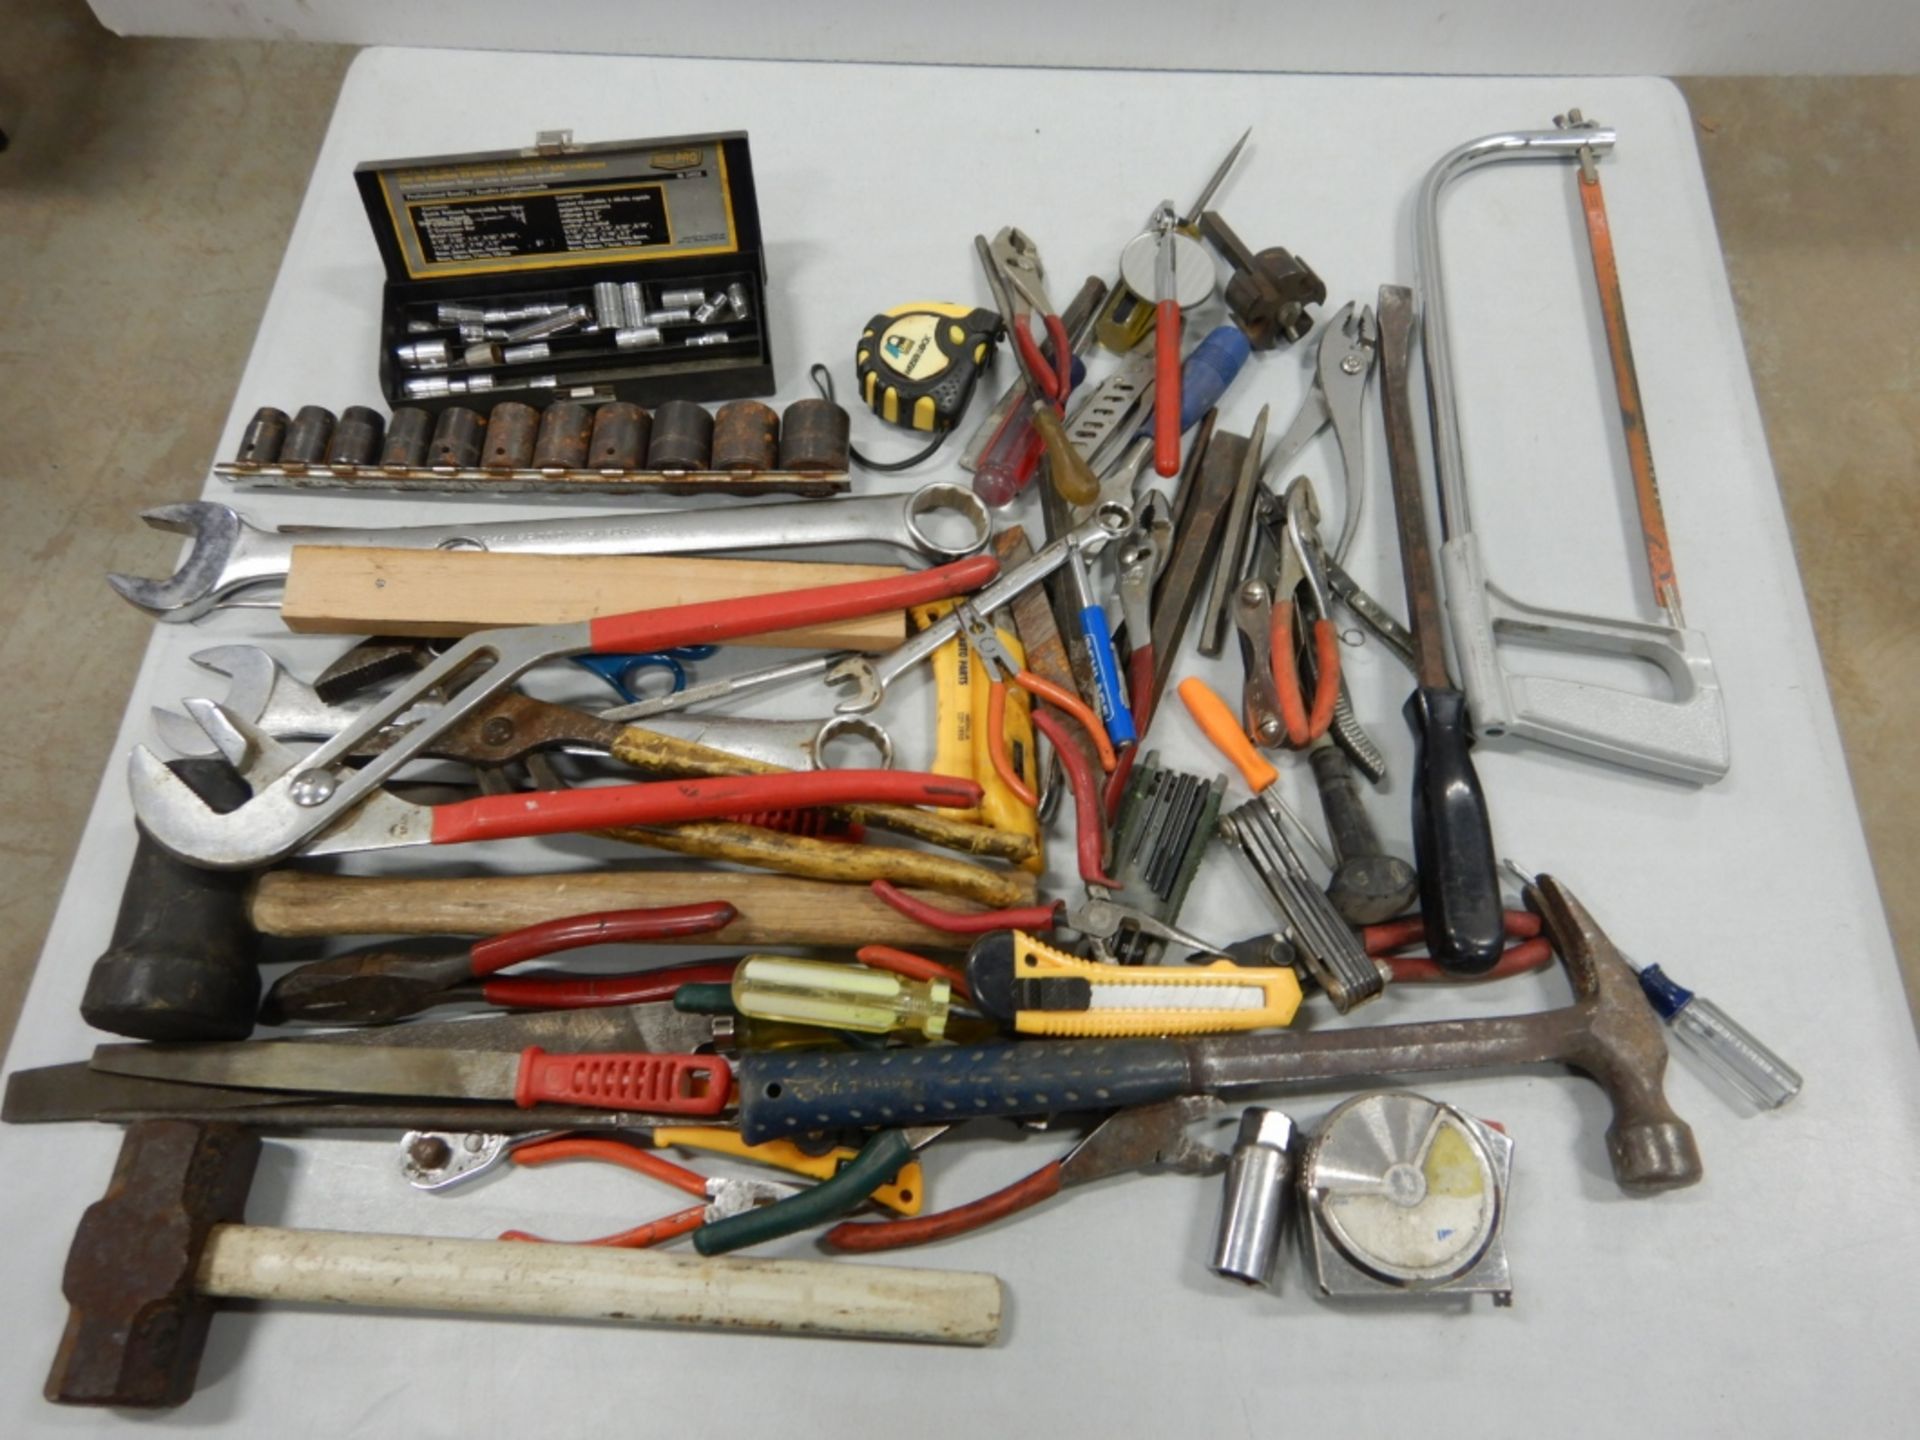 L/O ASSORTED HANDTOOLS, COMBINATION WRENCHES, SOCKETS, CAULKING GUNS, CHISELS, PLIERS, ETC. - Image 5 of 7